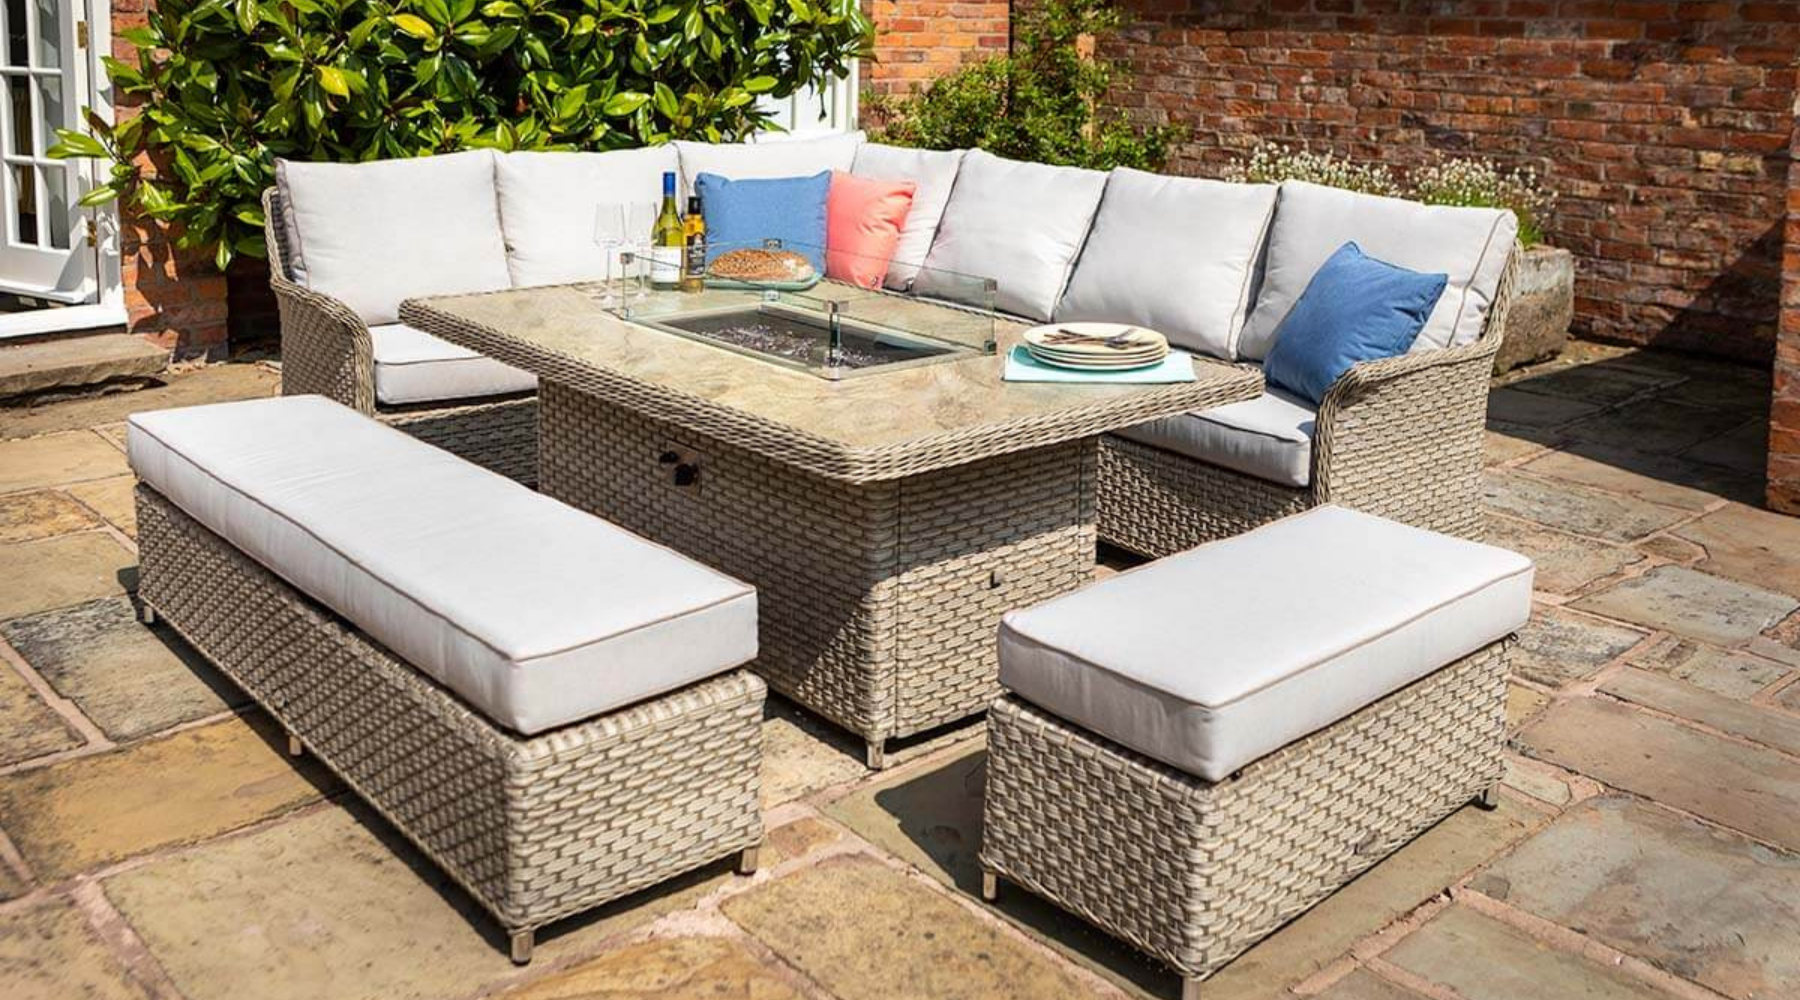 Our Advice for Looking After Your Garden Furniture